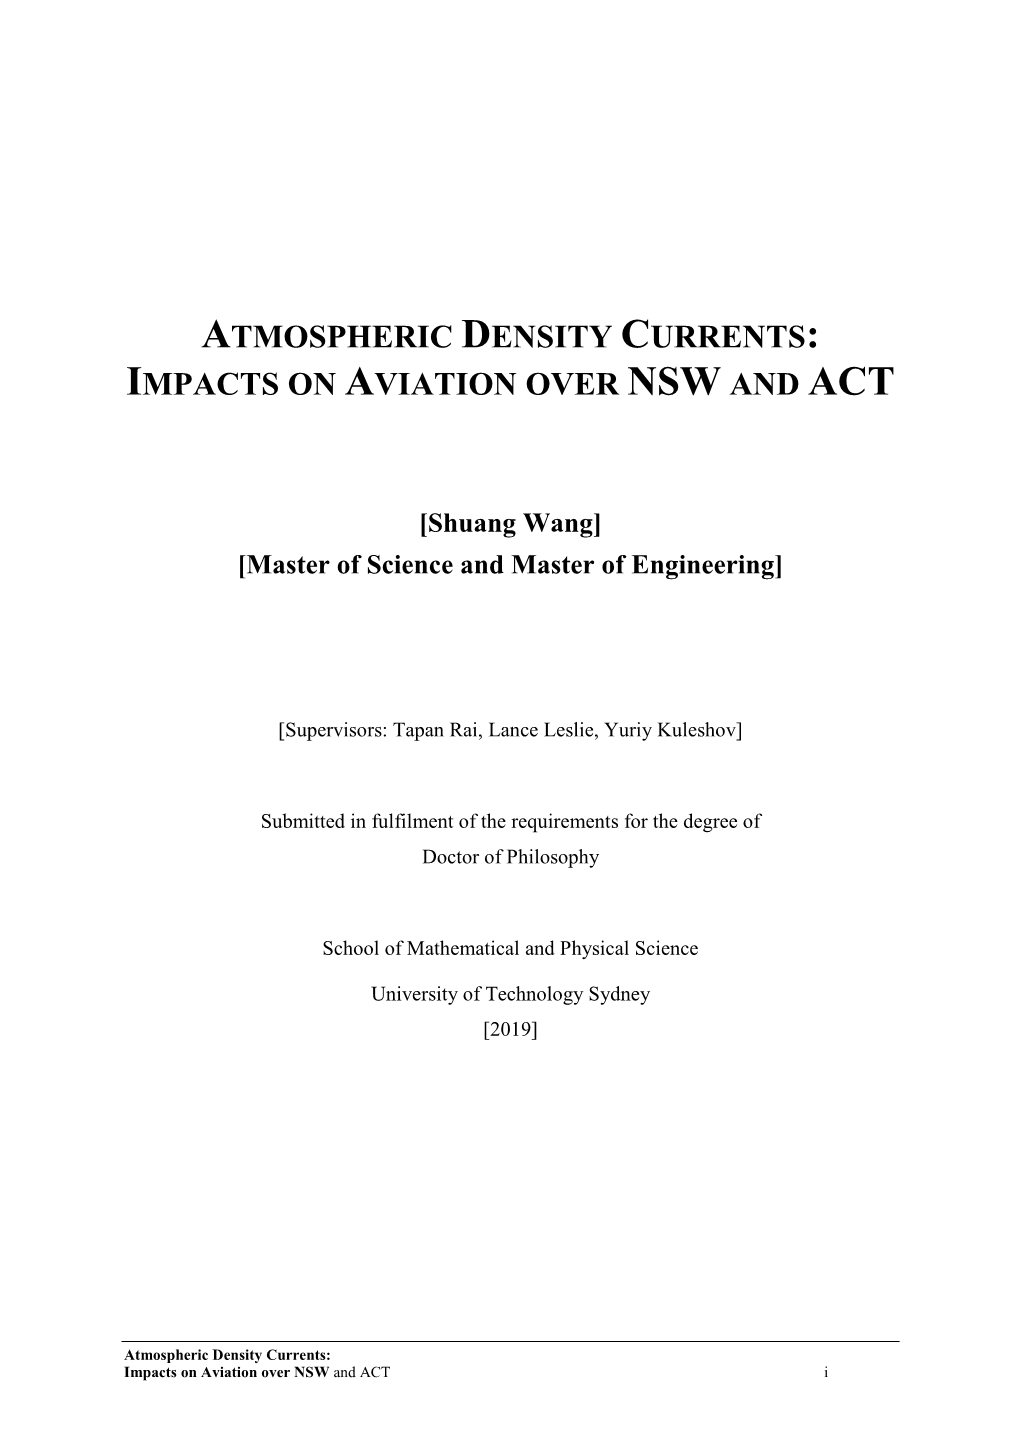 Impacts on Aviation Over Nsw and Act